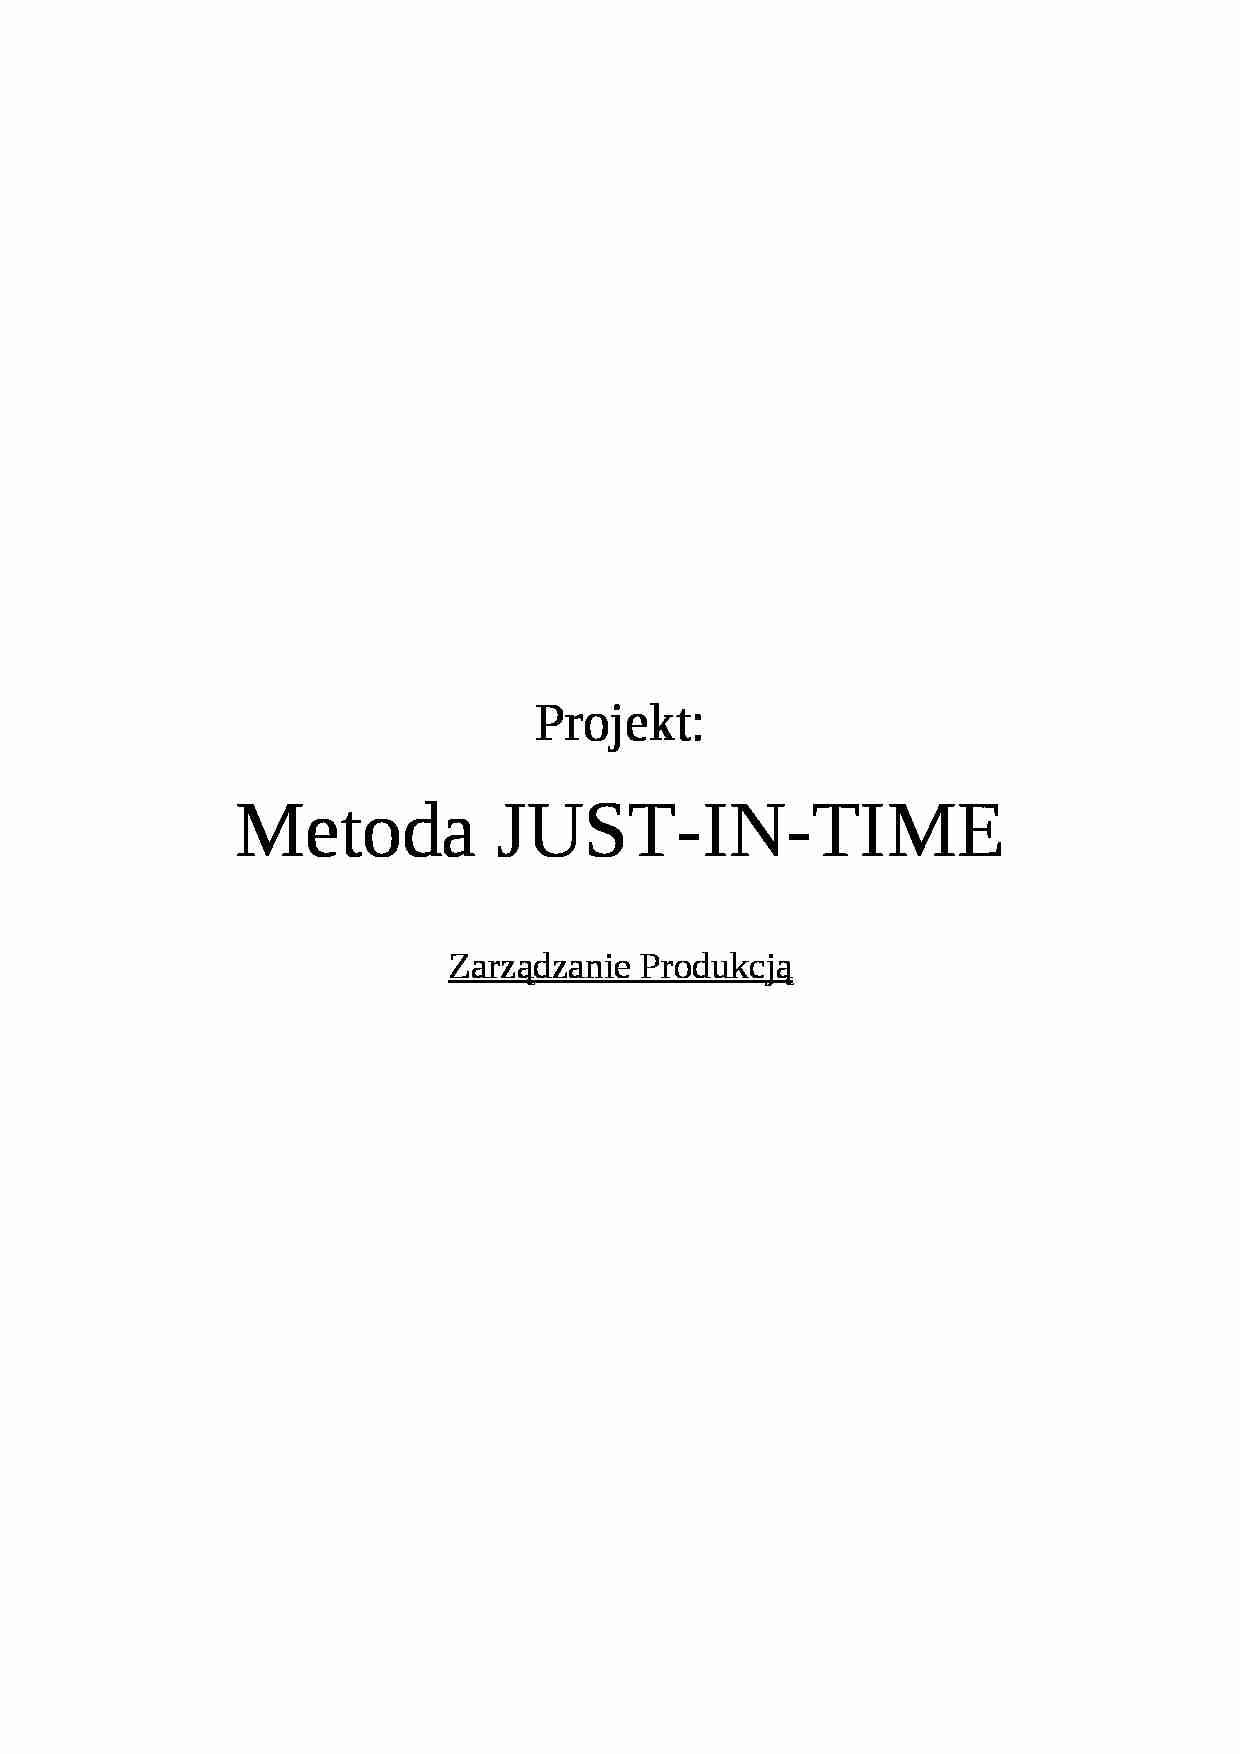 Metoda Just-In-Time - strona 1